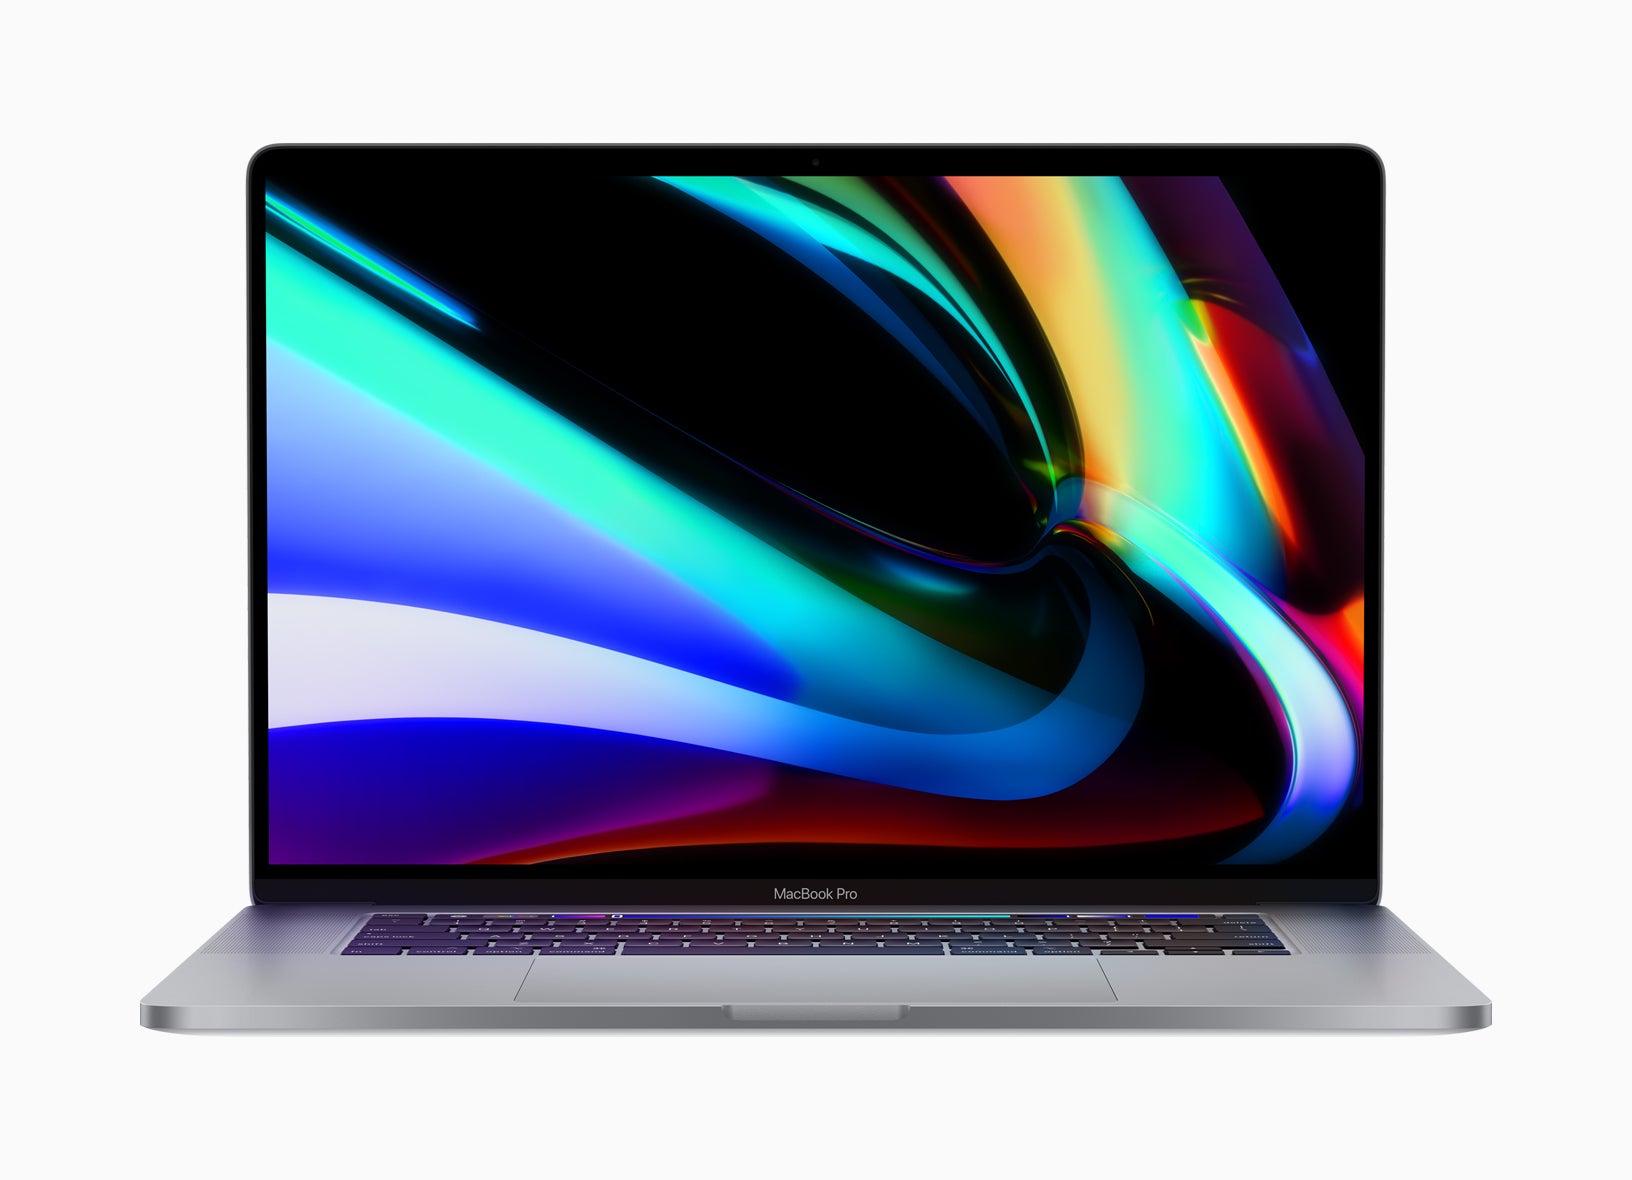 Refurbished 13inch M1 MacBook Pro now available from Apple Macworld